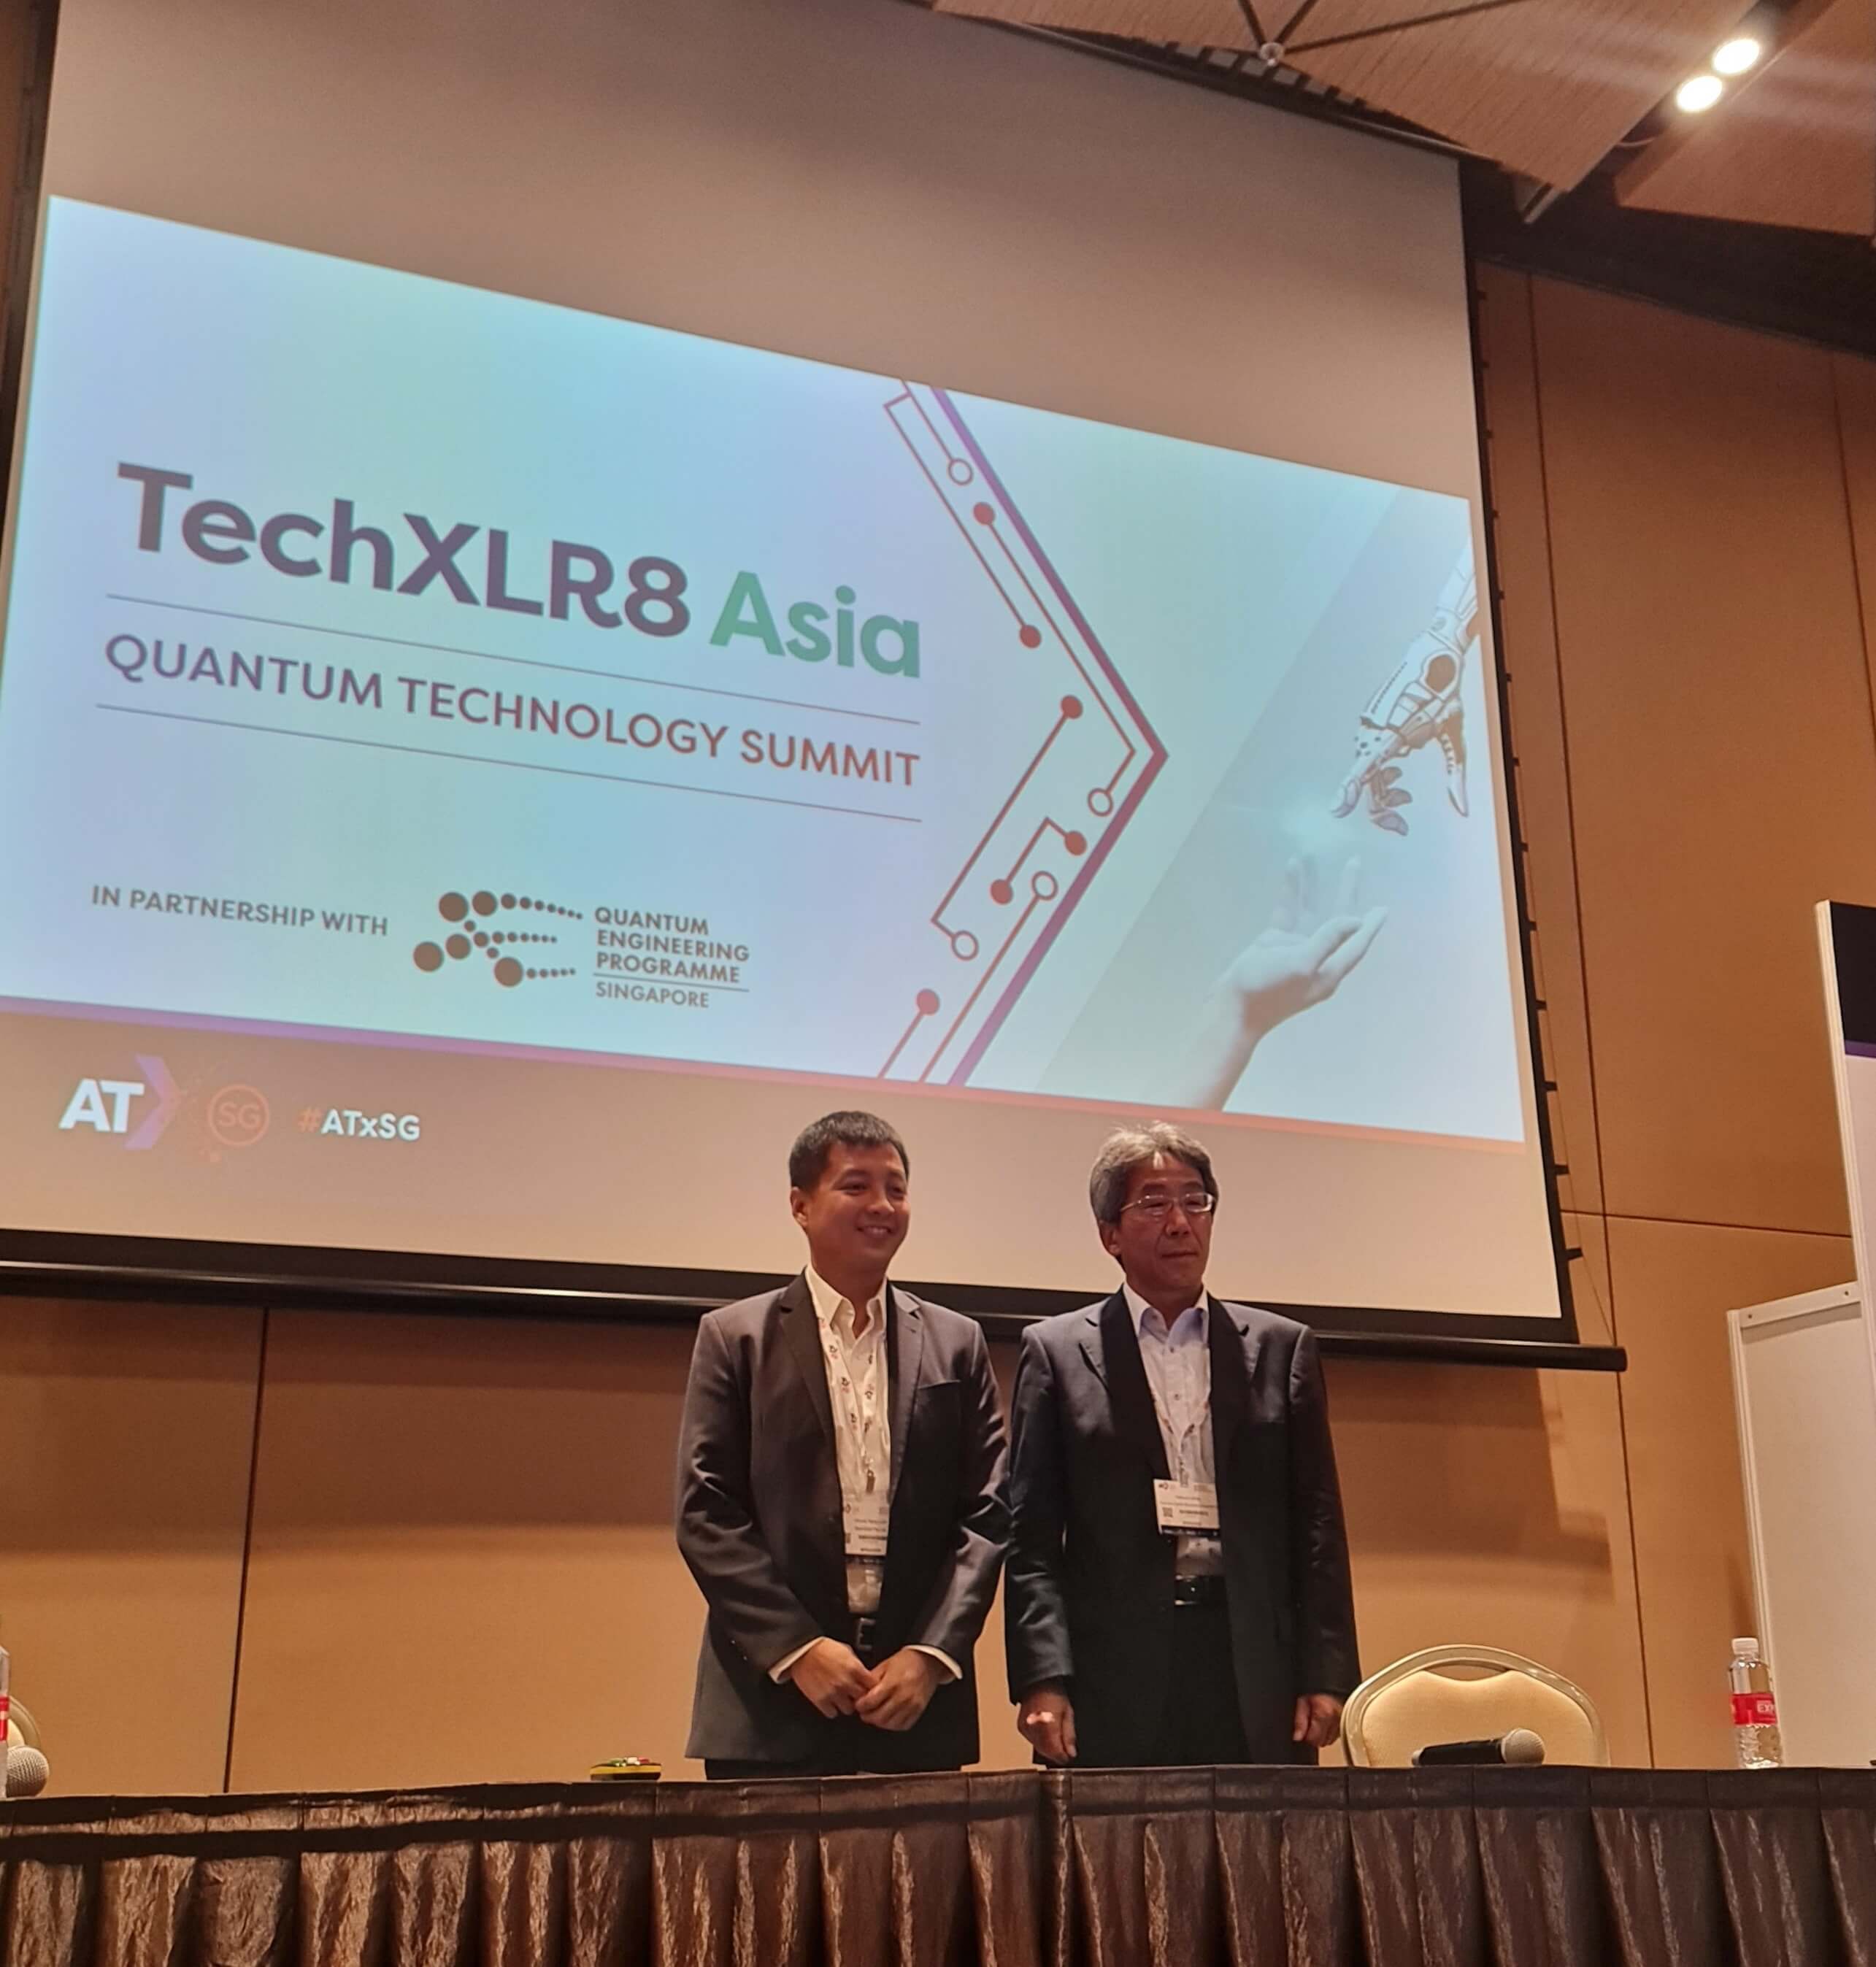 Toshiba presents “Achieving the secure Quantum keys of tomorrow, today” at Asia TechXSingapore 2022